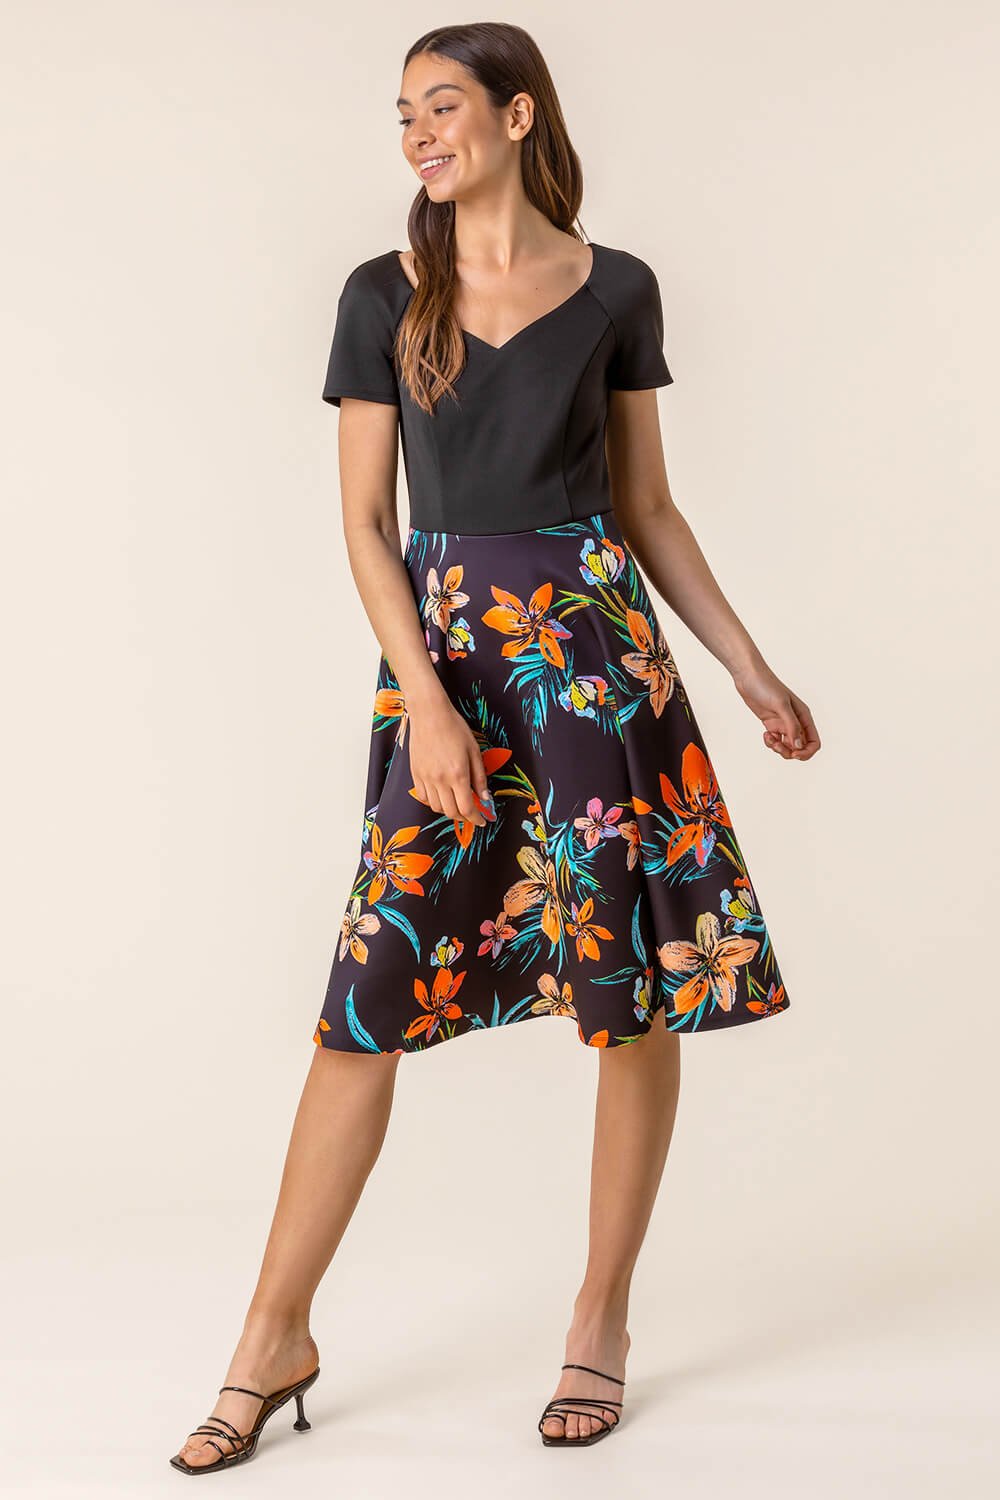 Black Tropical Print Fit & Flare Dress, Image 3 of 4